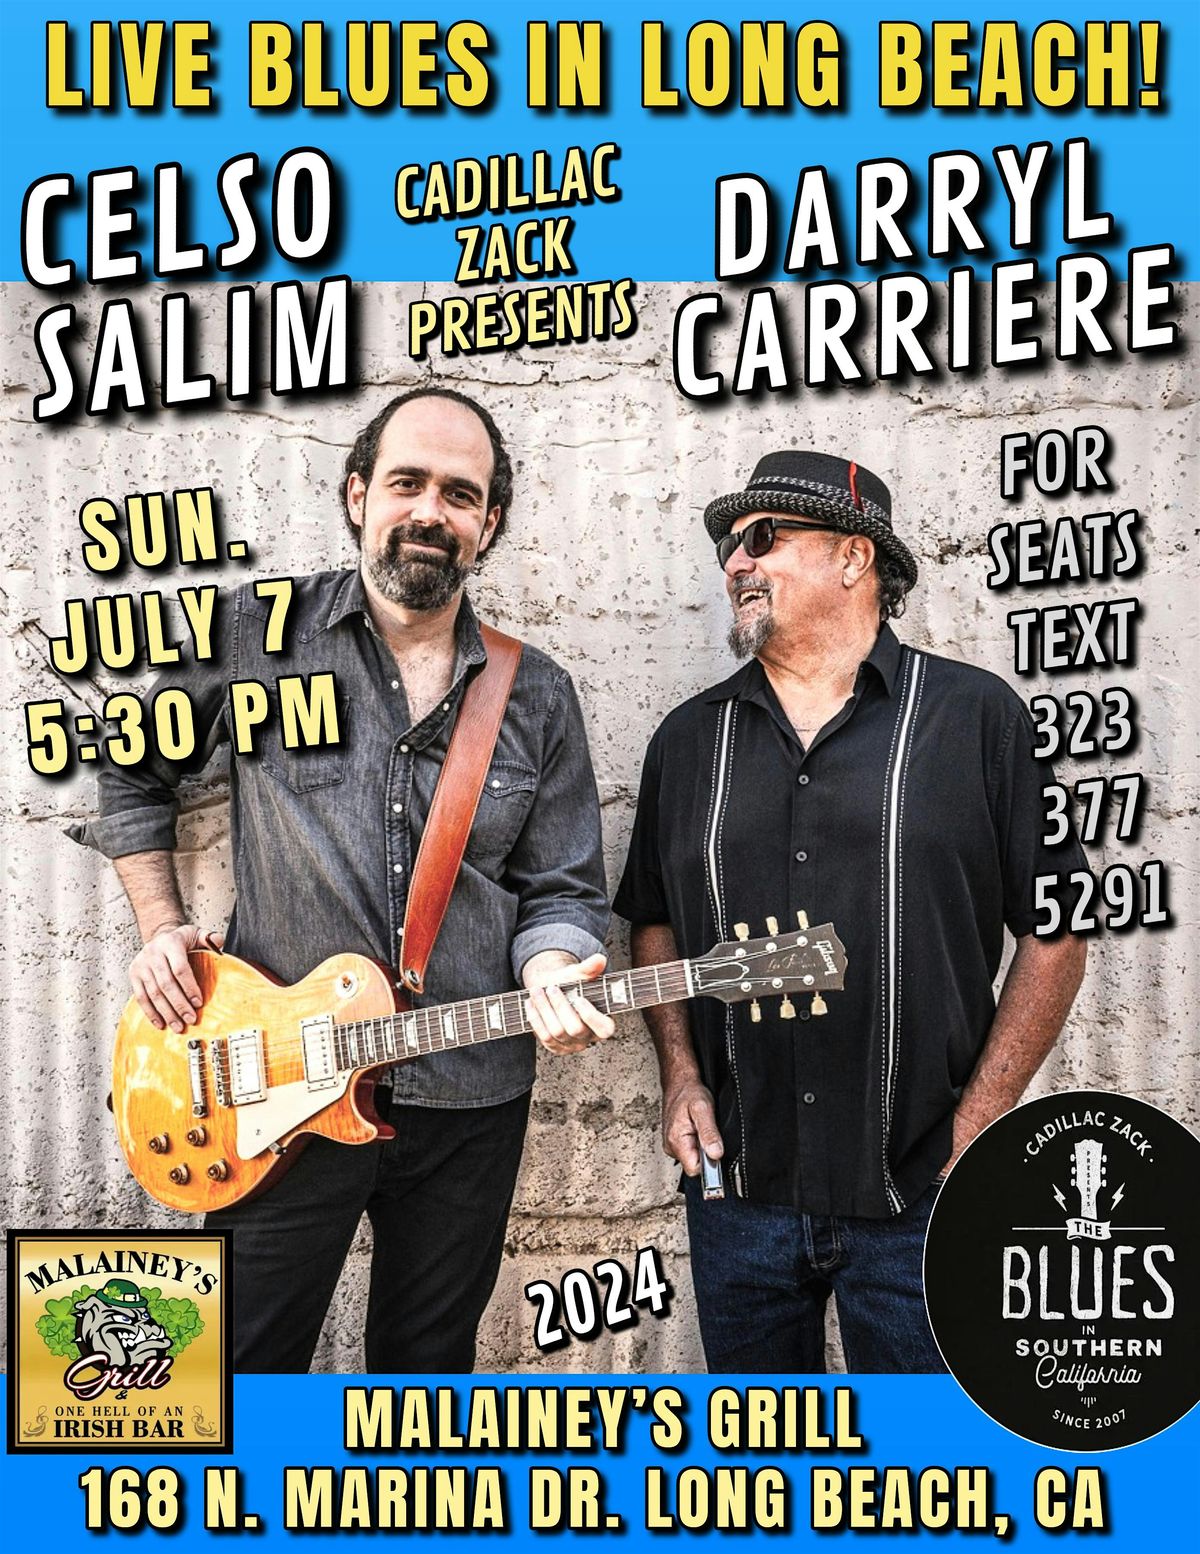 CELSO SALIM & DARRYL CARRIERE - A Blues Supergroup - in Long Beach!